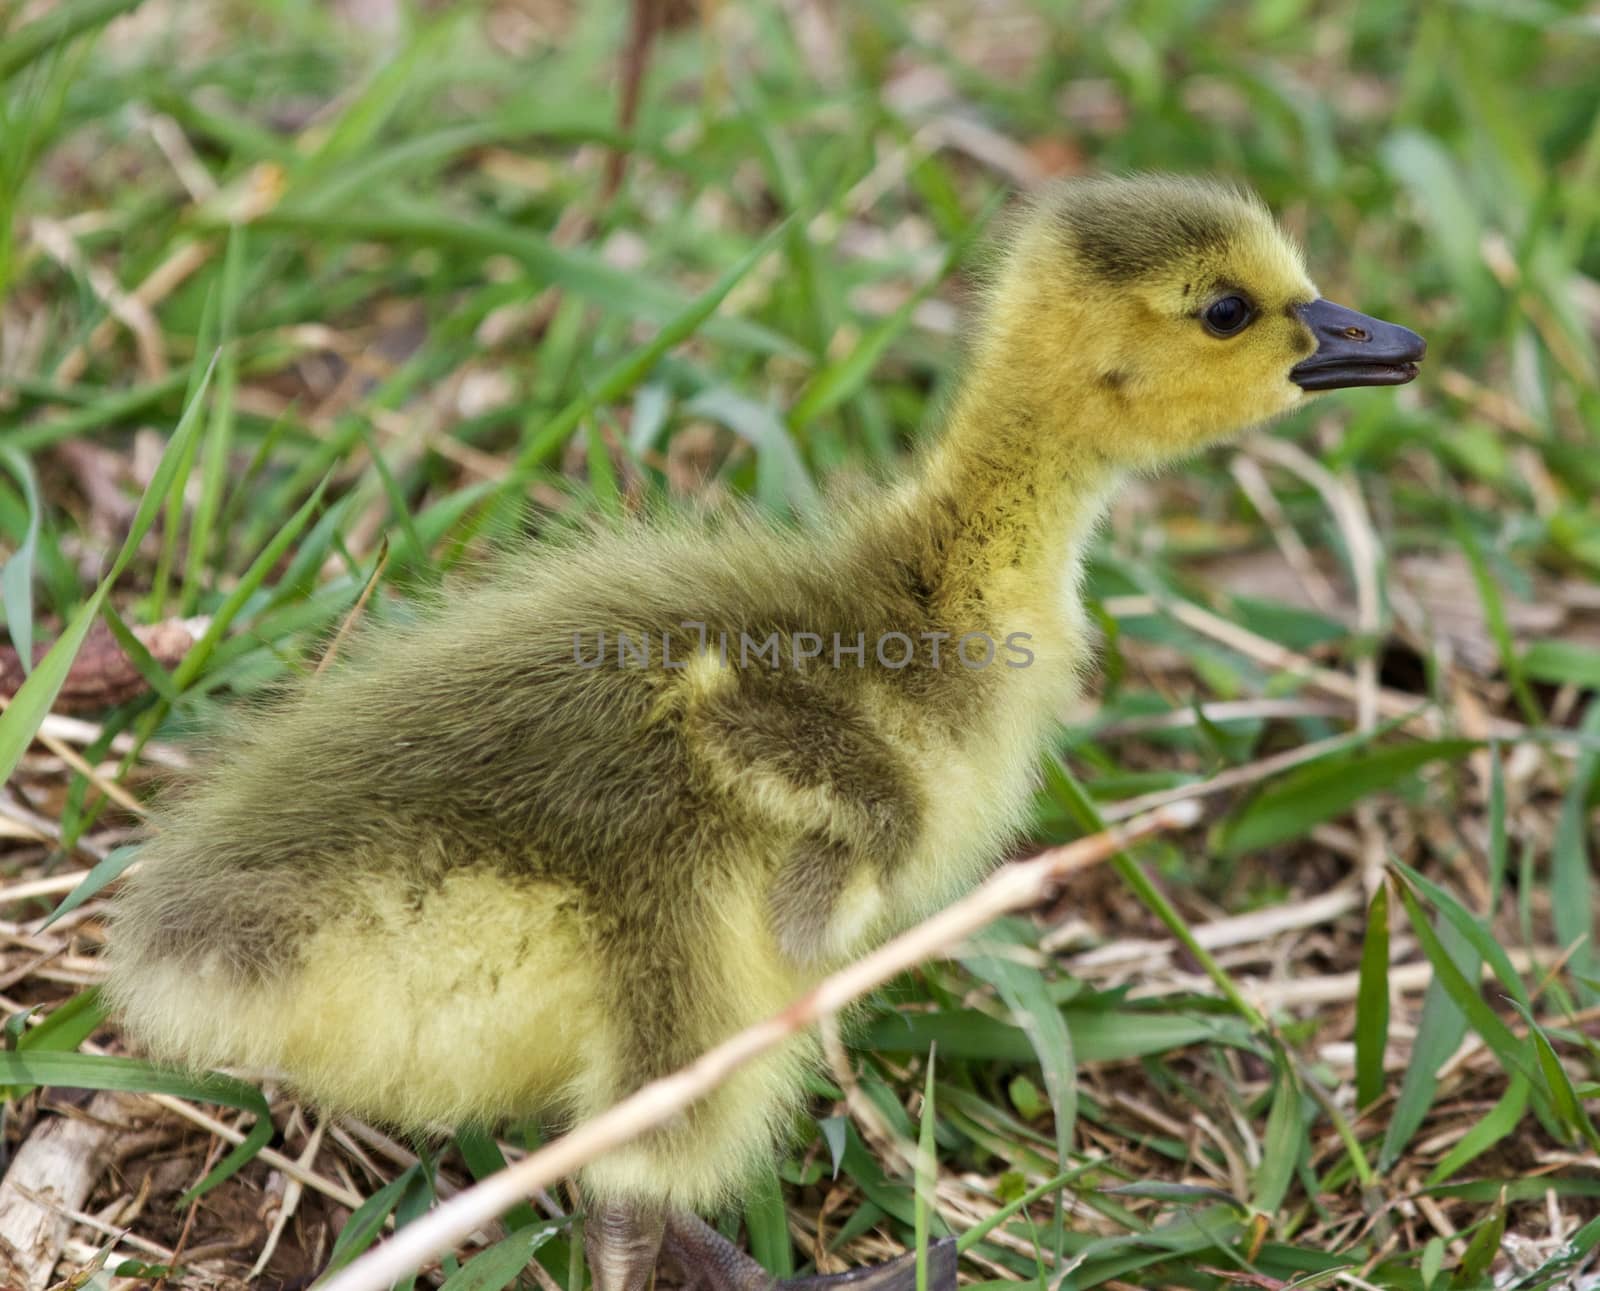 Beautiful isolated photo with a chick of the Canada geese looking at something